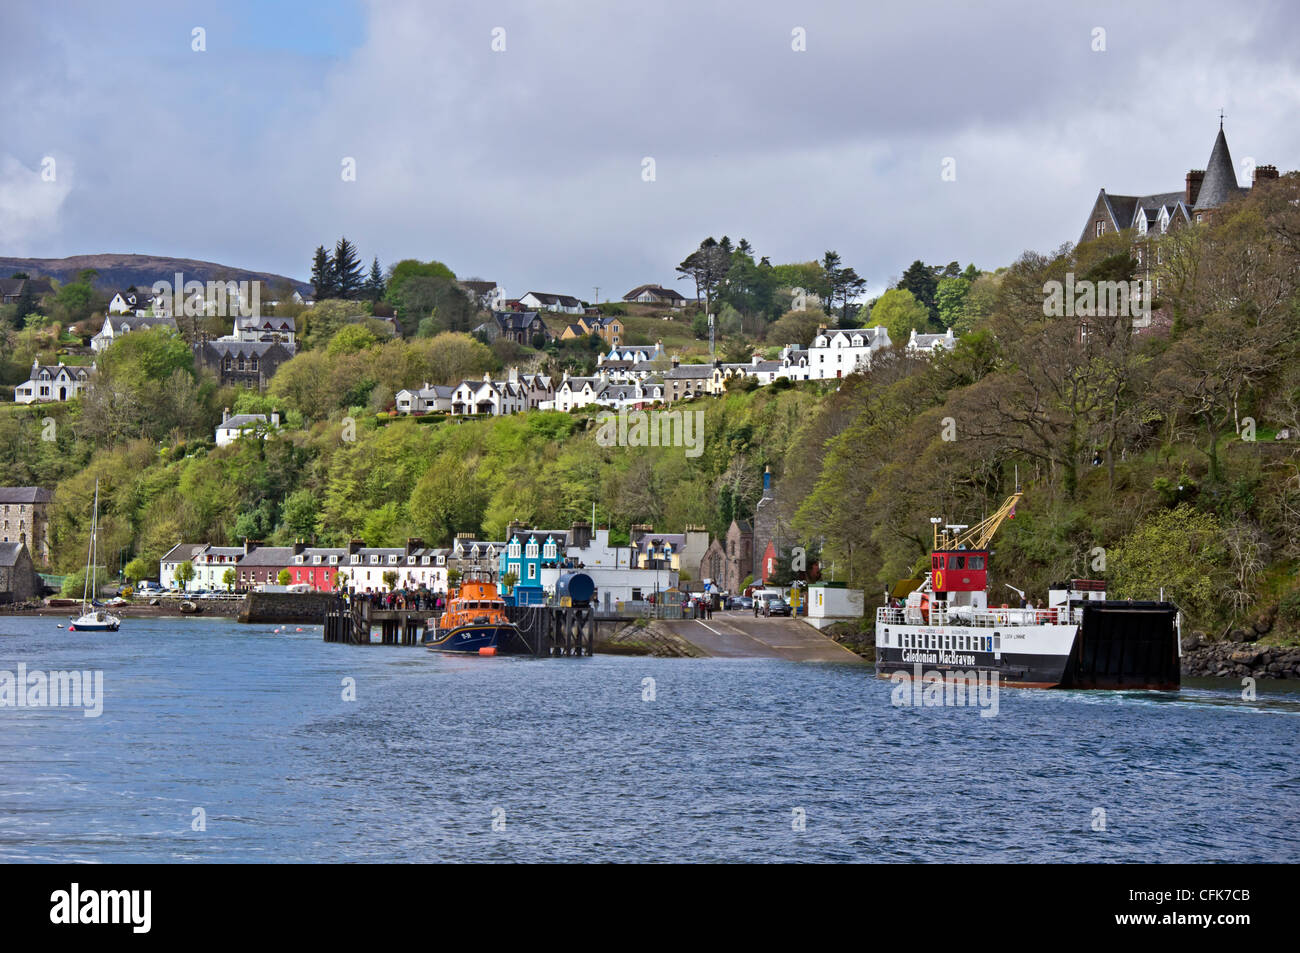 View of the small town of Tobermory on the island of Mull in western Scotland from the Sound of Mull with ferry approaching pier Stock Photo